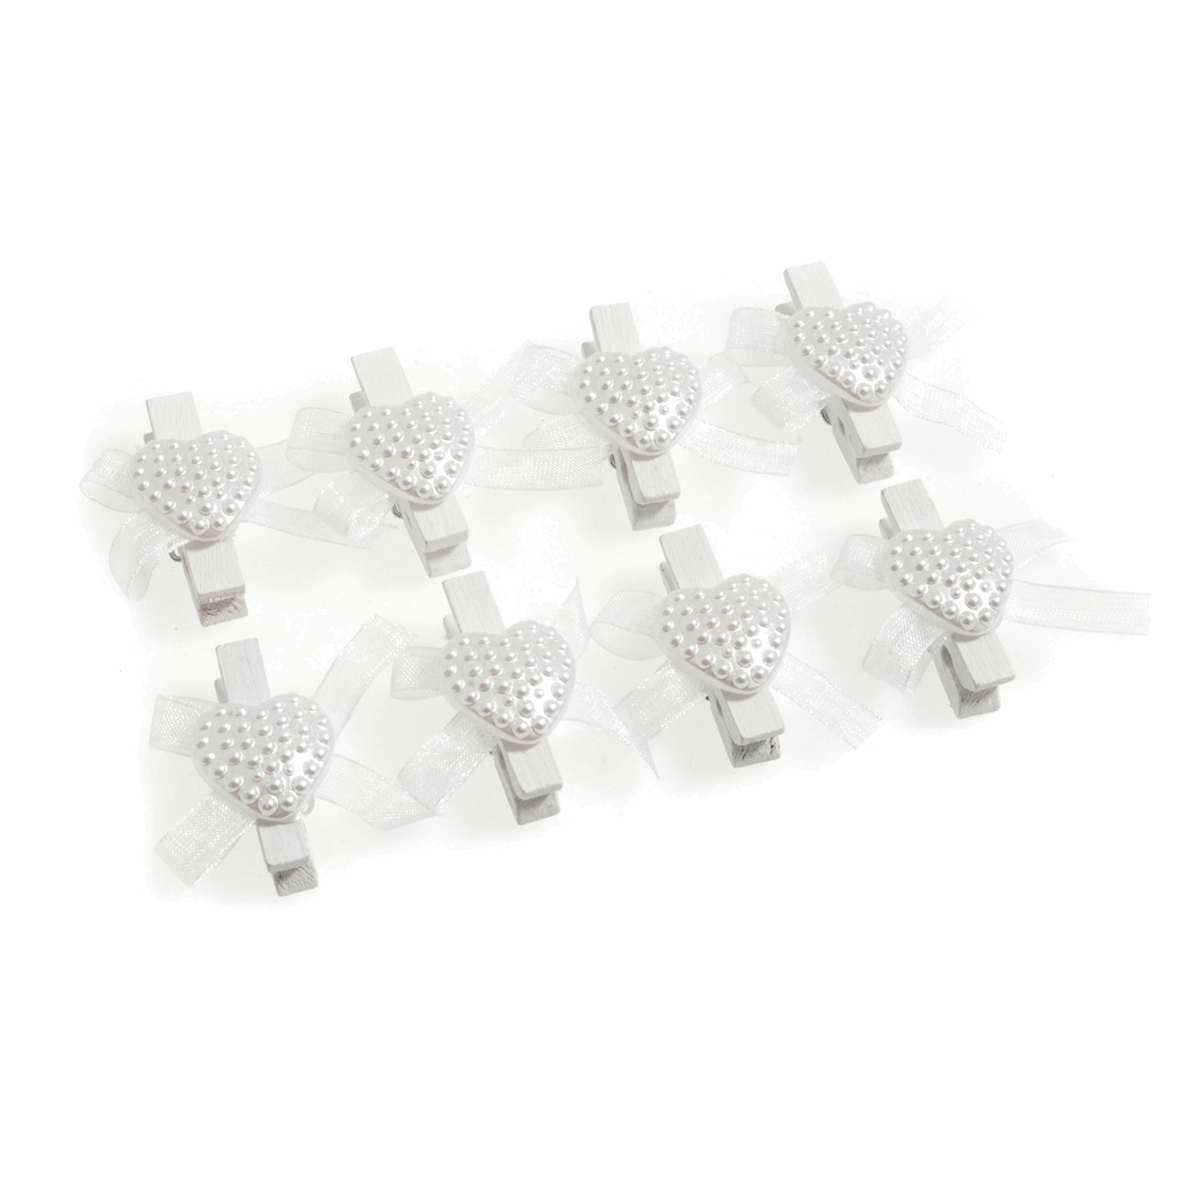 White Pearl Textured Heart Wedding Pegs with Bows - 2cm (Pack of 8)